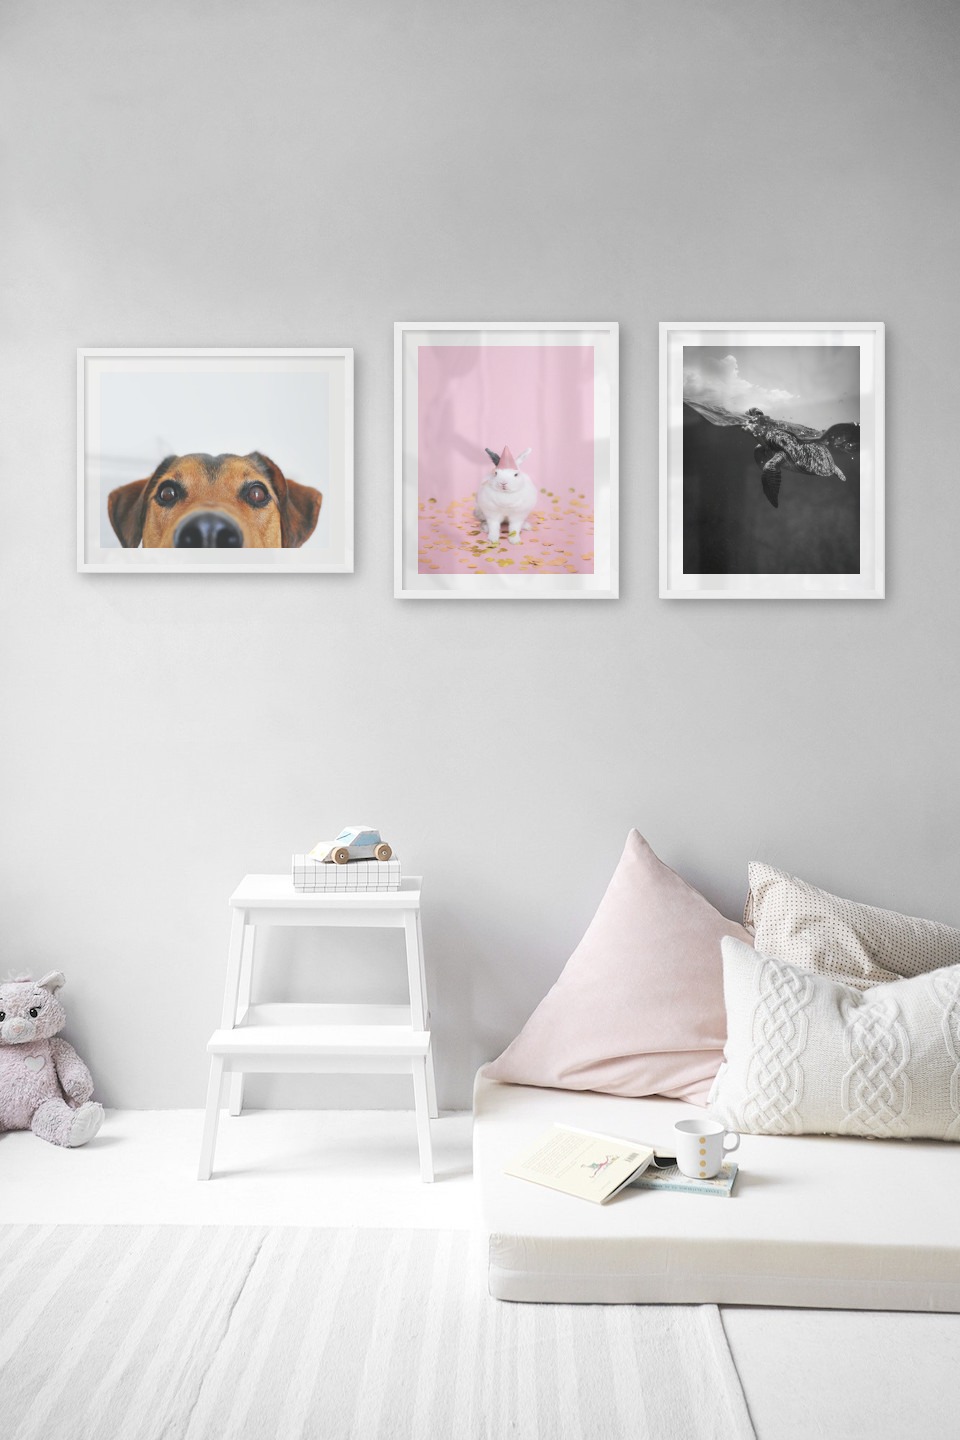 Gallery wall with picture frames in white in sizes 40x50 with prints "Hundnos", "Rabbit with party hat" and "Turtle"